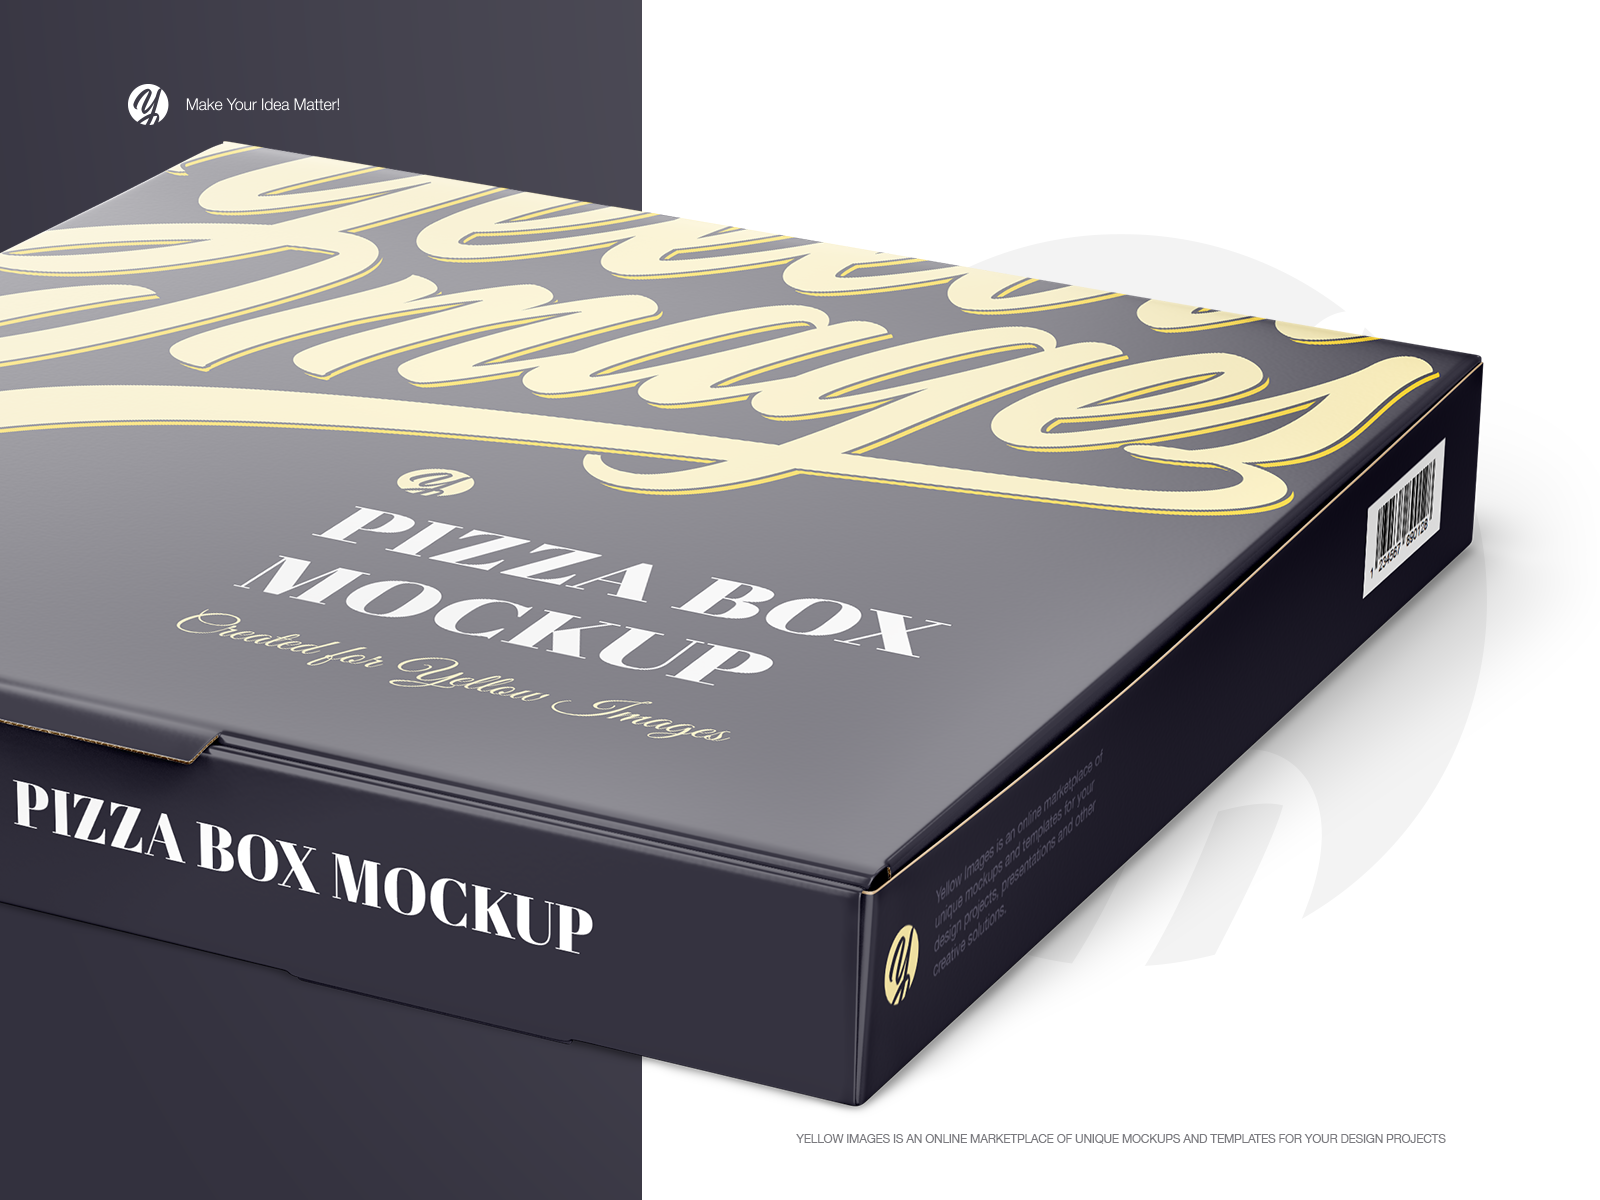 Download Glossy Pizza Box Mockup By Helenstock On Dribbble PSD Mockup Templates